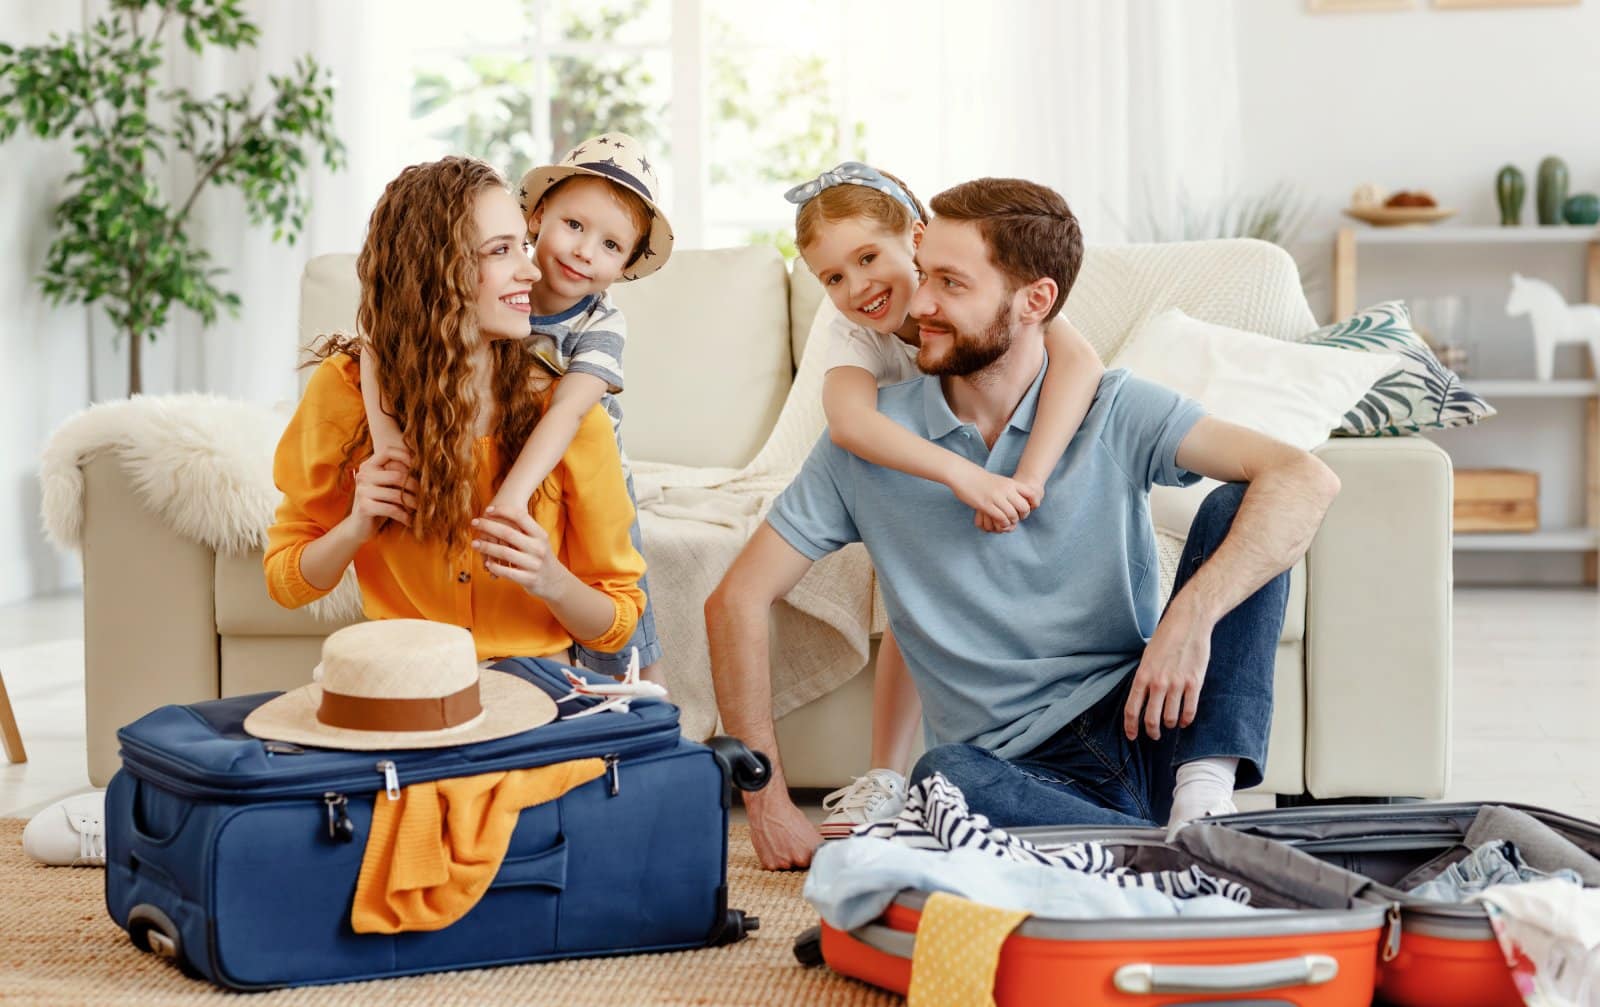 <p><span>While packing for family travel, consider accommodations that provide amenities to lighten your luggage. Look for hotels offering items like baby cribs, strollers, and high chairs. Some family-friendly hotels go the extra mile by providing essentials such as bottle warmers, baby bathtubs, and even child-sized bathrobes.</span></p> <p><span>This attention to detail can significantly ease your packing challenges, allowing you to focus on bringing personal items that will enhance your family’s comfort and enjoyment during the trip. The availability of laundry services can also be a boon, reducing the need to pack many outfits for each family member.</span></p> <p><b>Insider’s Tip: </b><span>Pack a separate carry-on with essentials for your kids, including a change of clothes, snacks, and entertainment options.</span></p>